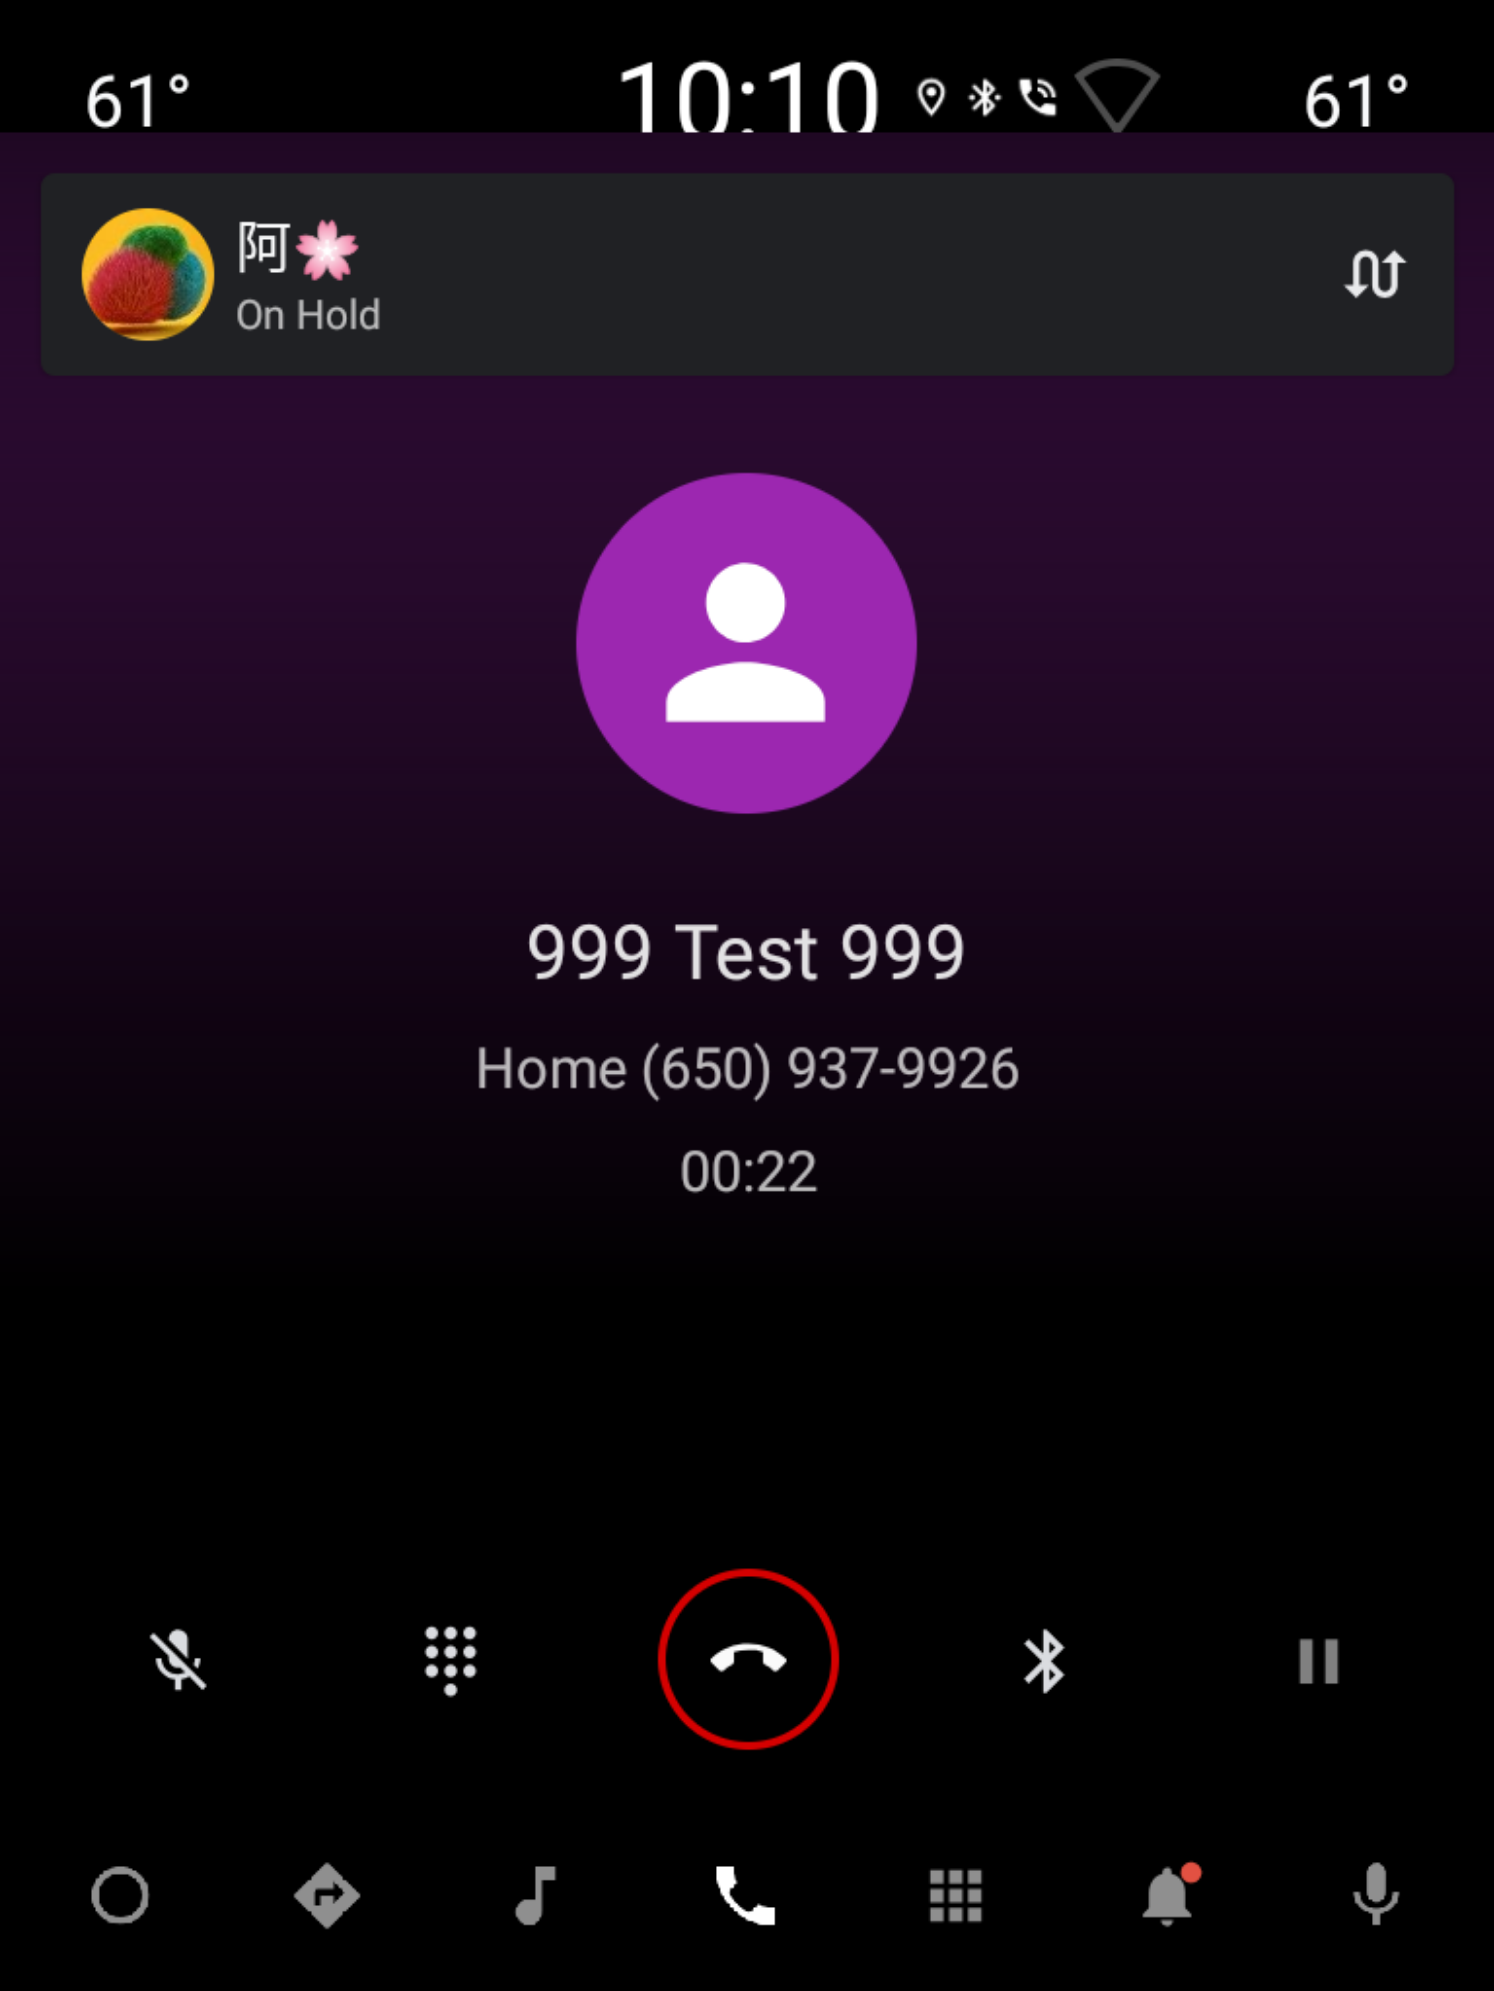 Ongoing call page in portrait mode